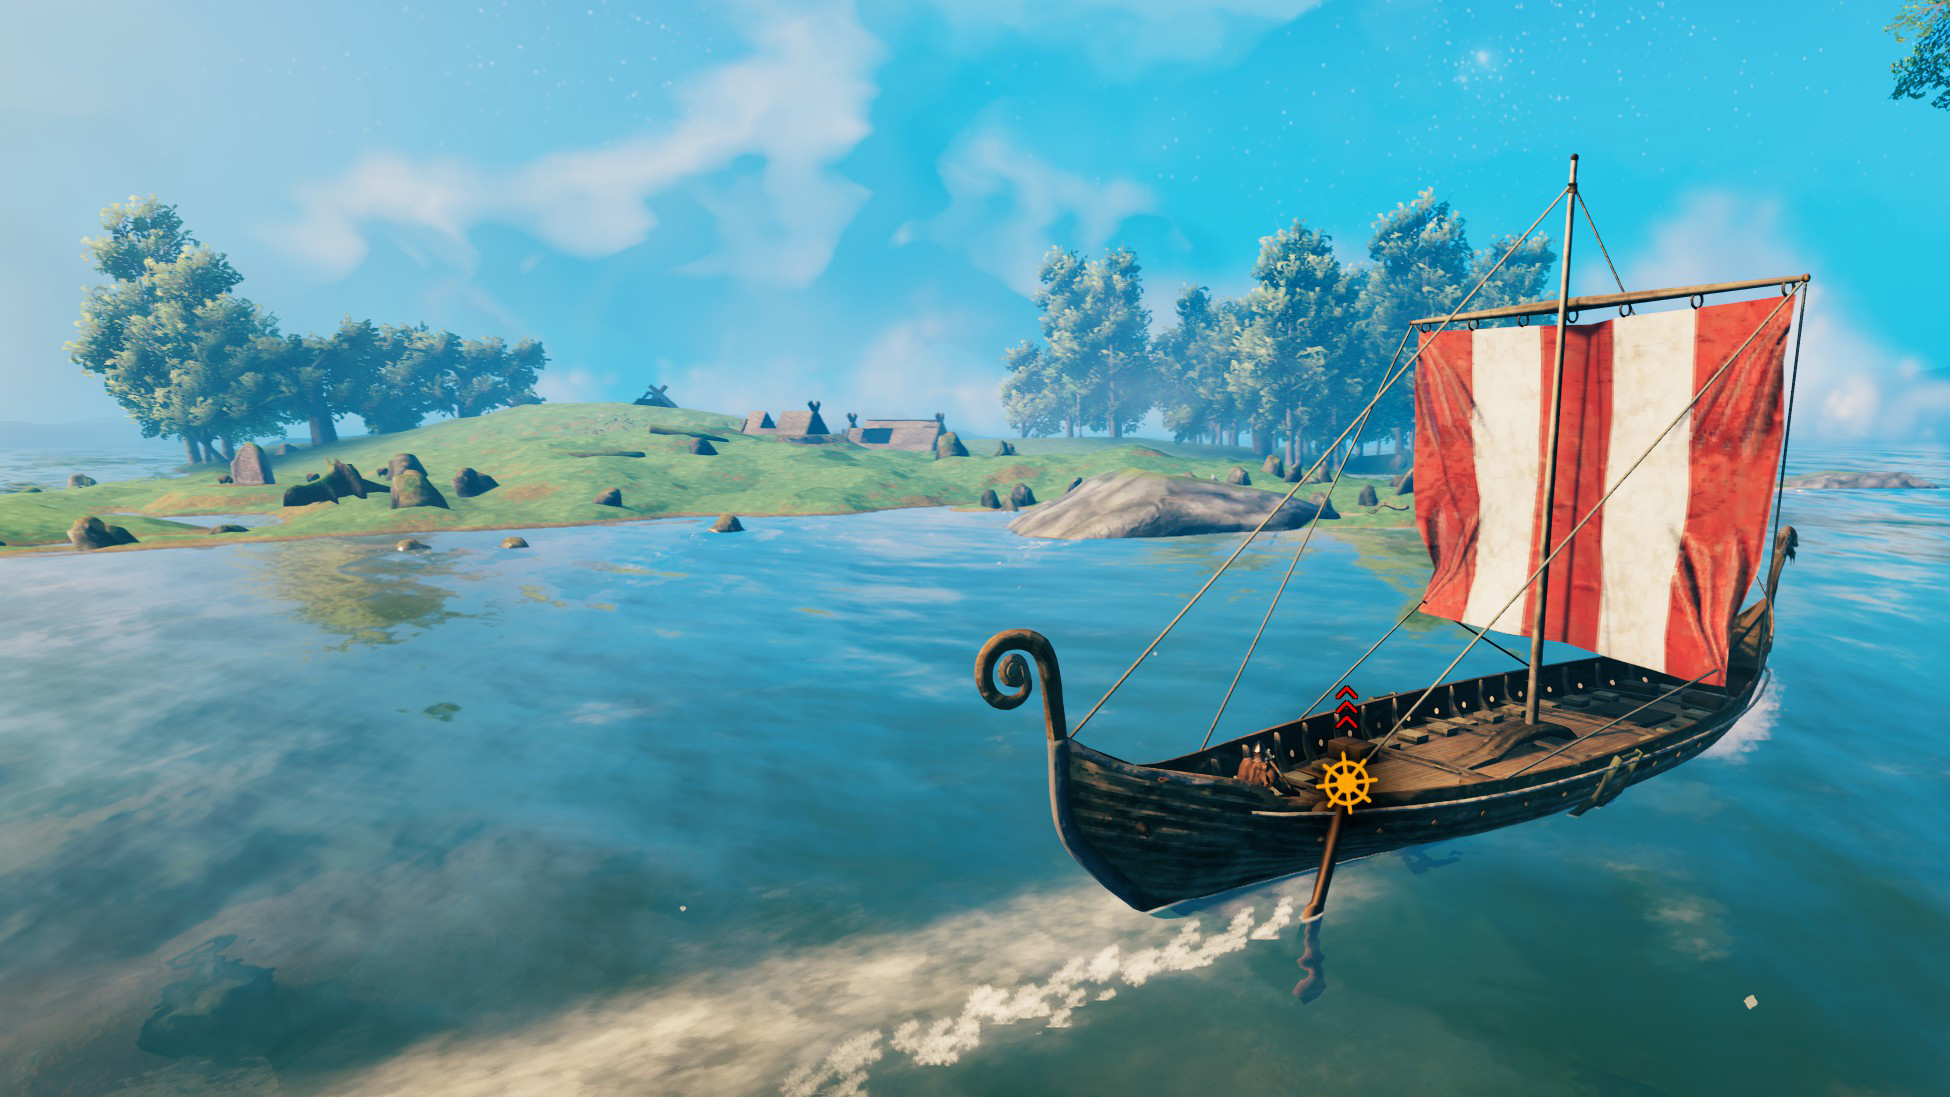  No, birds are not flying away with boats in Valheim 